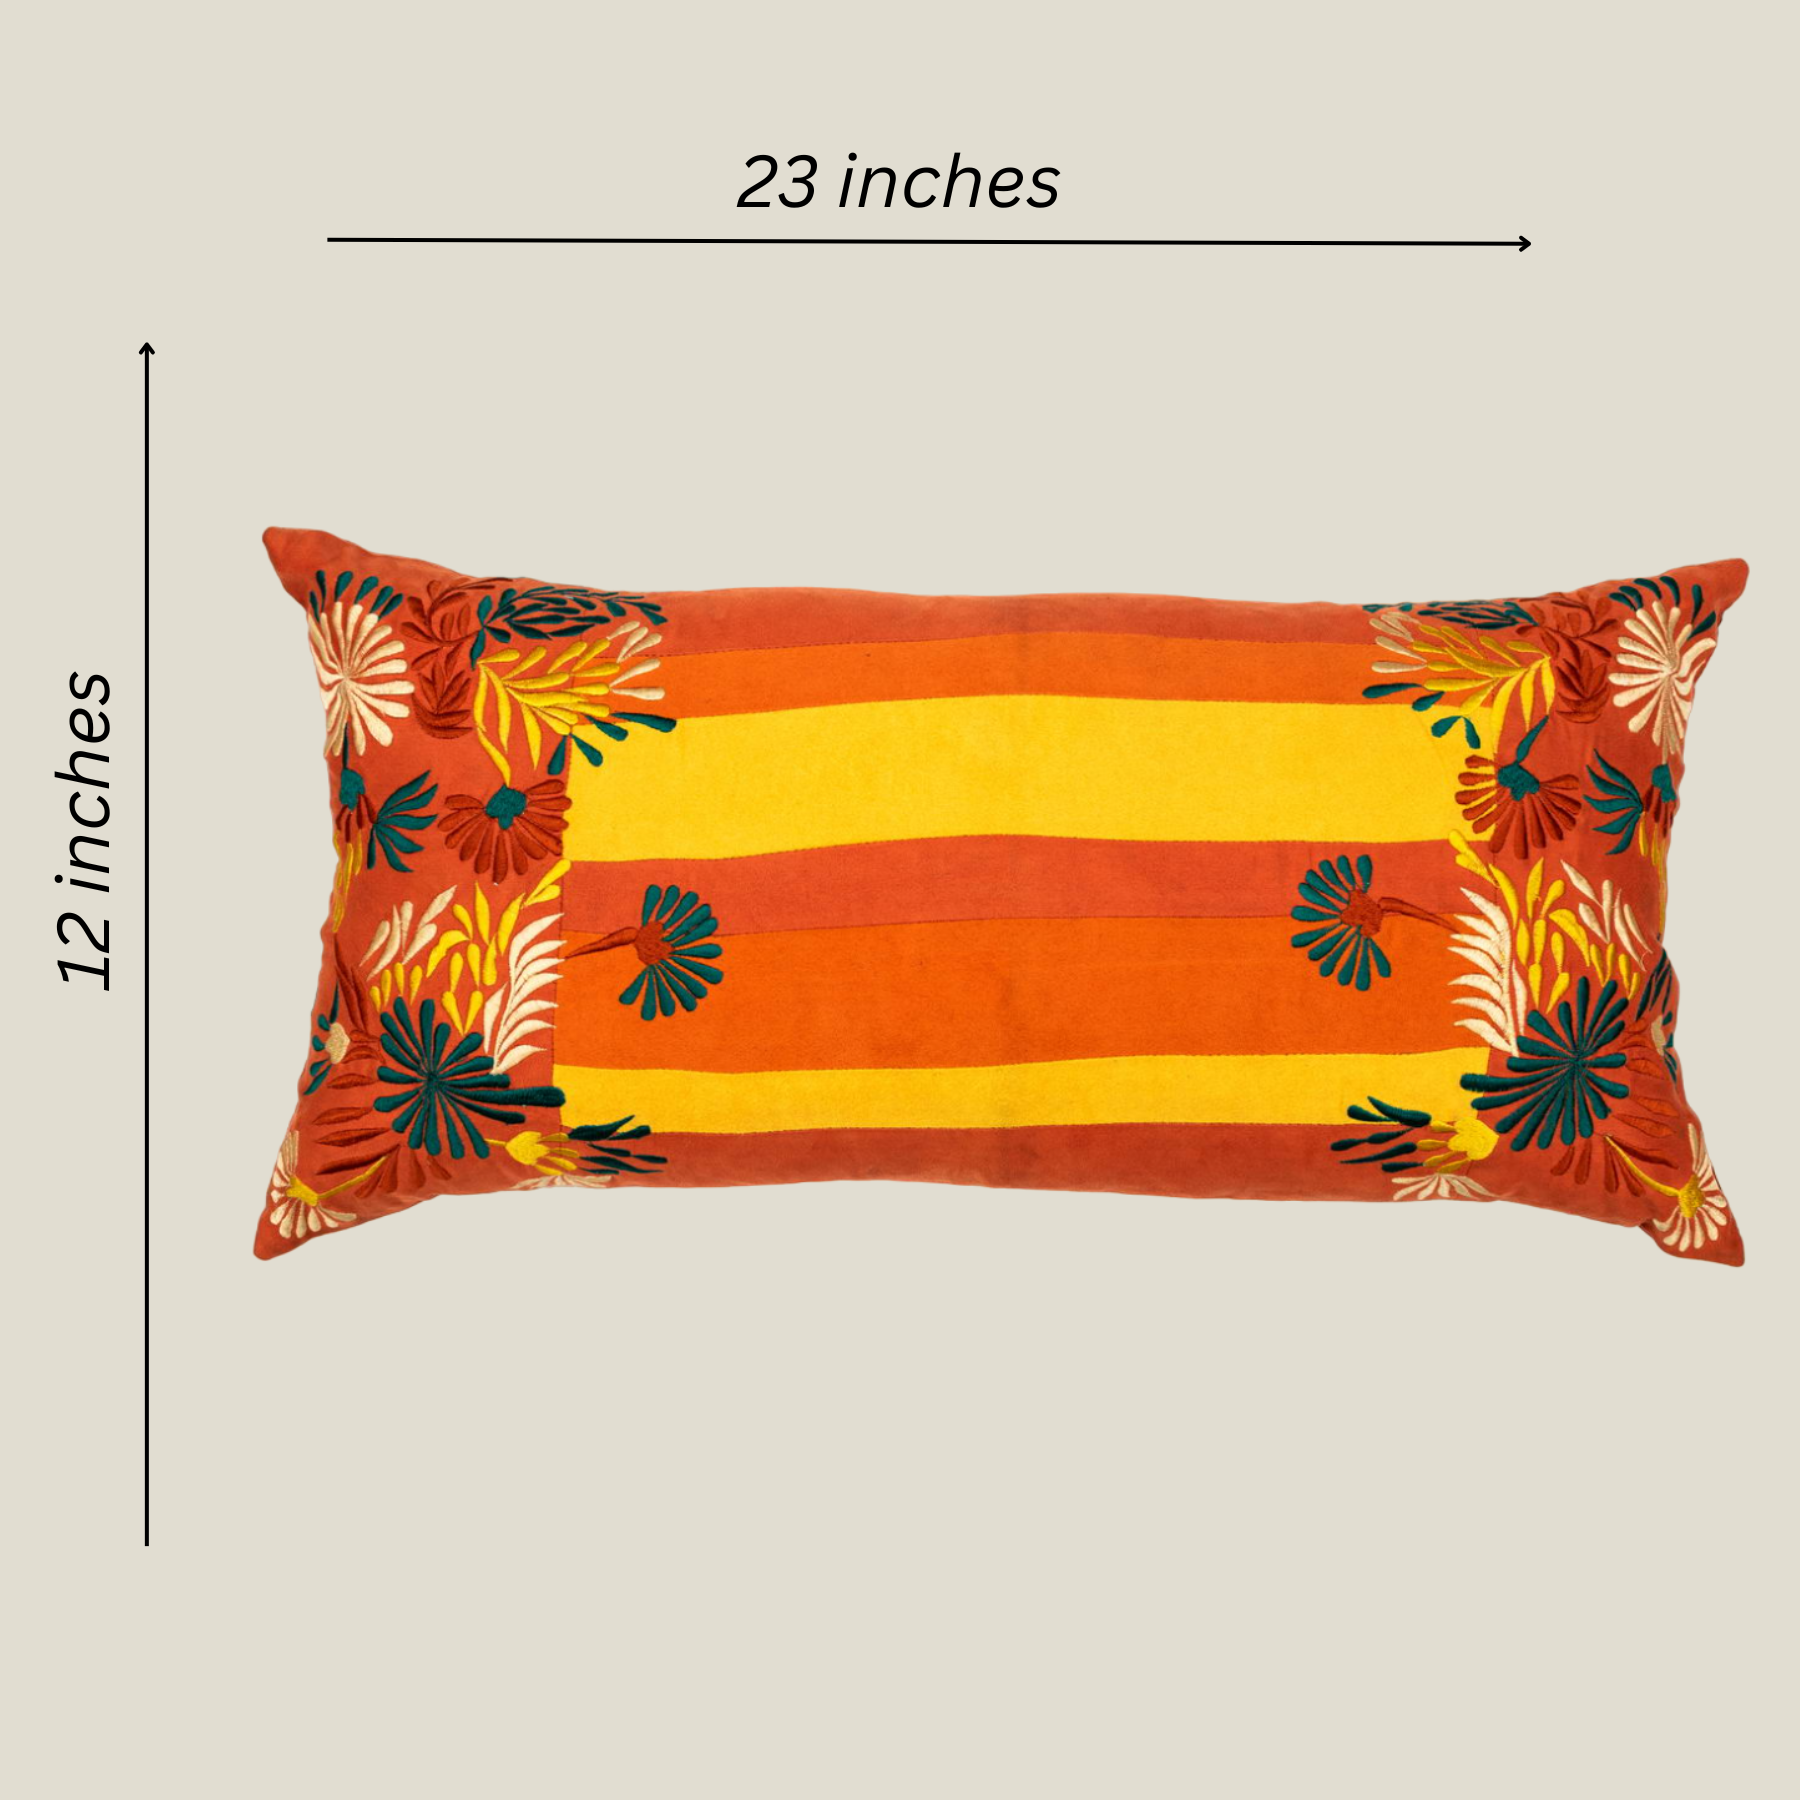 The Luxelife Orange Floral Embroidered Cushion Cover